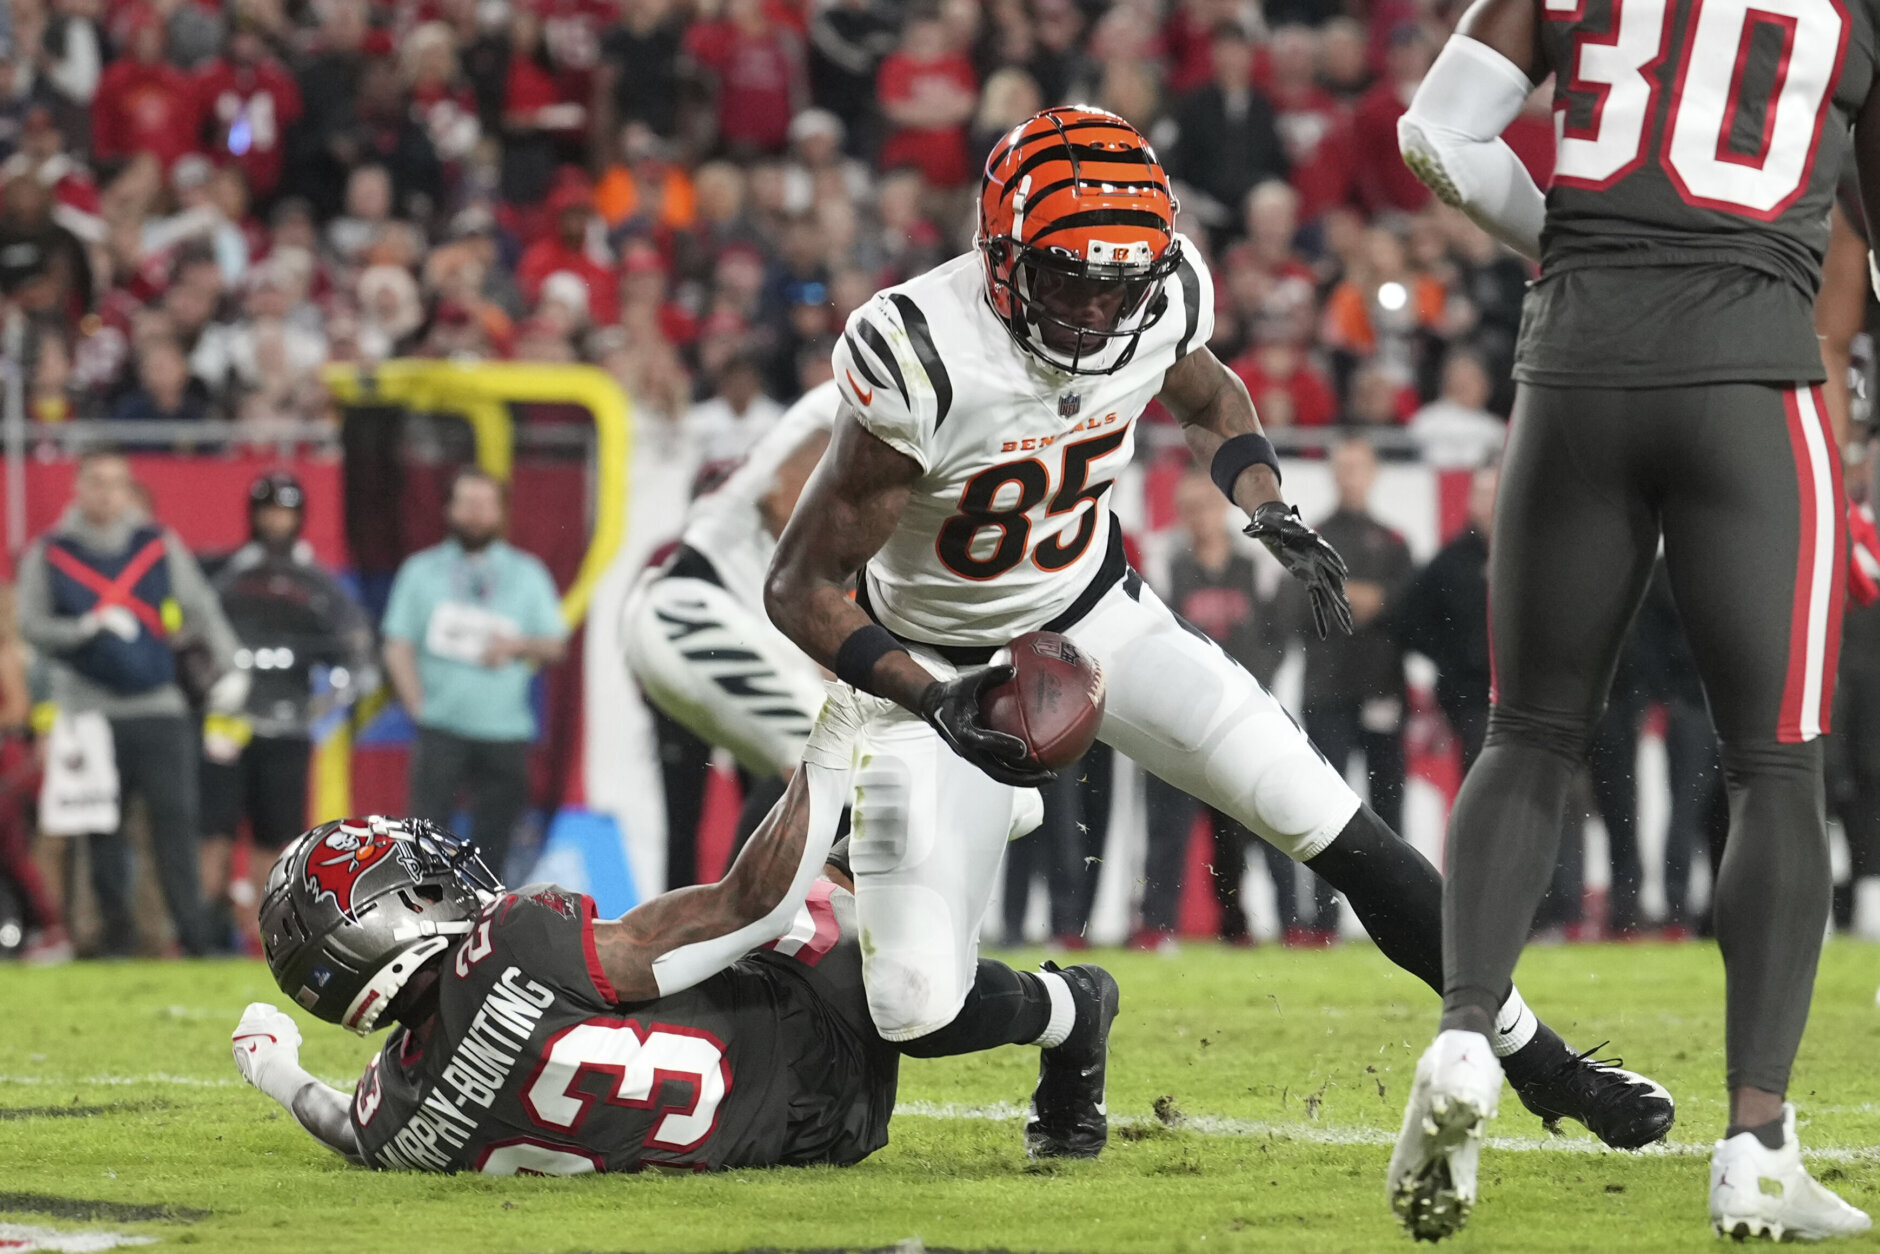 <p><em><strong>Bengals 34</strong></em><br />
<em><strong>Buccaneers 23</strong></em></p>
<p>Thanks to the third 17-point comeback in the NFL this week (an NFL record), the AFC North is Cincinnati&#8217;s to lose — and they won&#8217;t. The only question is whether Baltimore rallies in time to make their Week 18 matchup with the Bengals an important one.</p>
